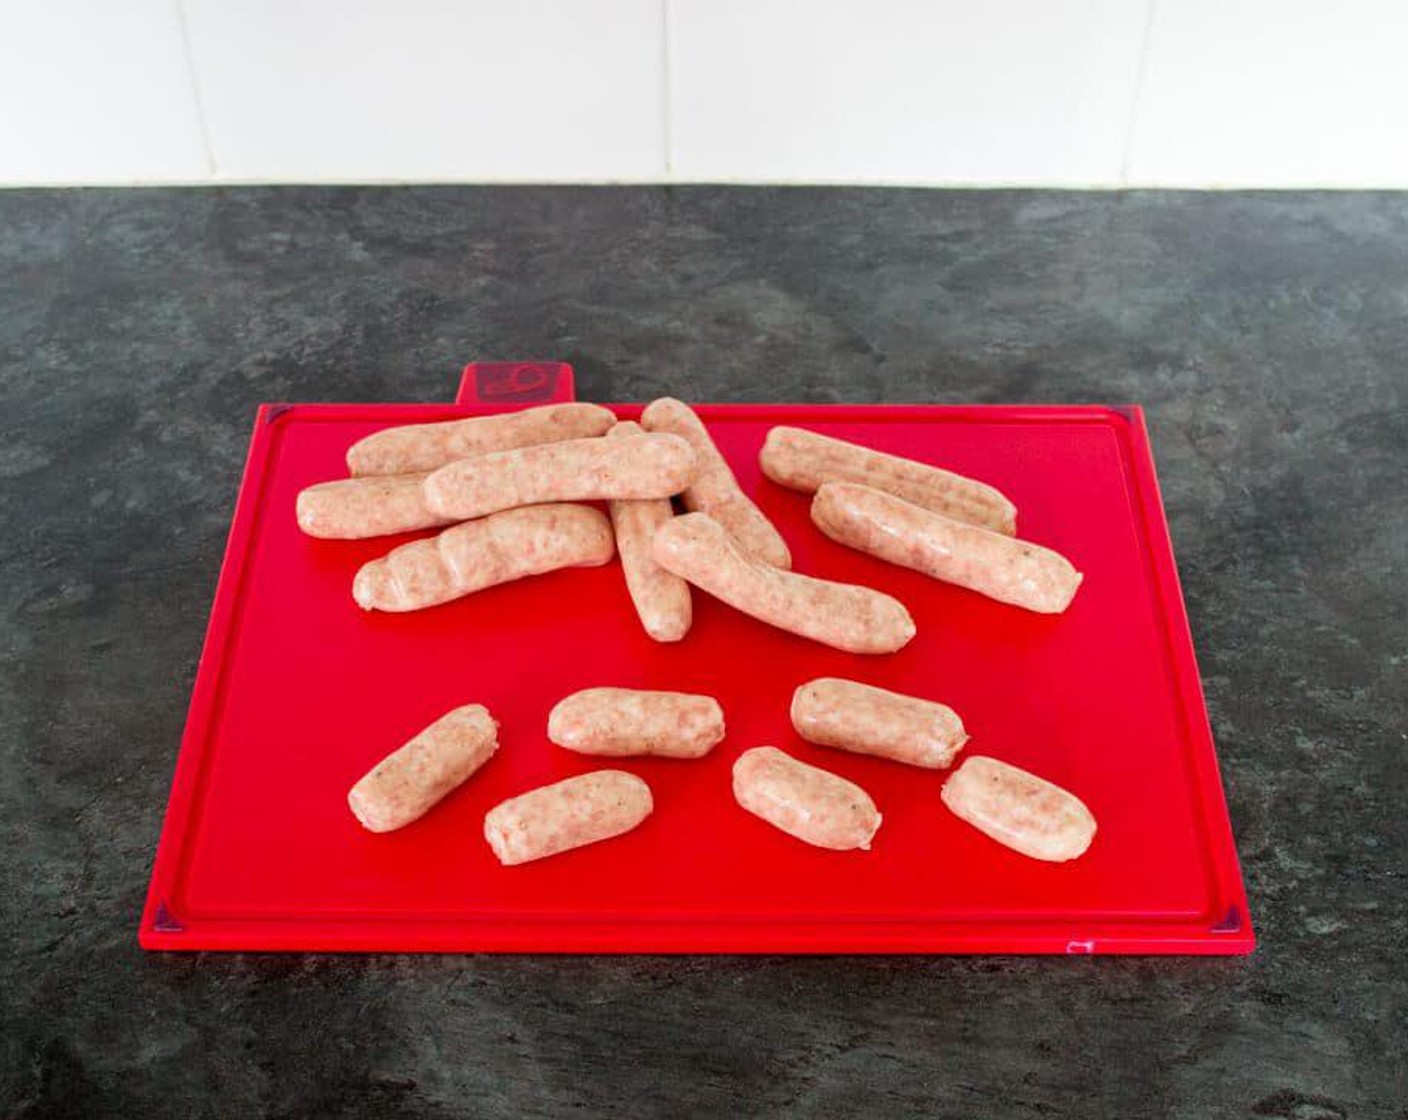 step 2 Next, if you have regular sized Chipolata Sausages (13 oz), twist them in the middle and pull/cut apart to make lots of mini bites. You can already buy them this size from some supermarkets/butchers.